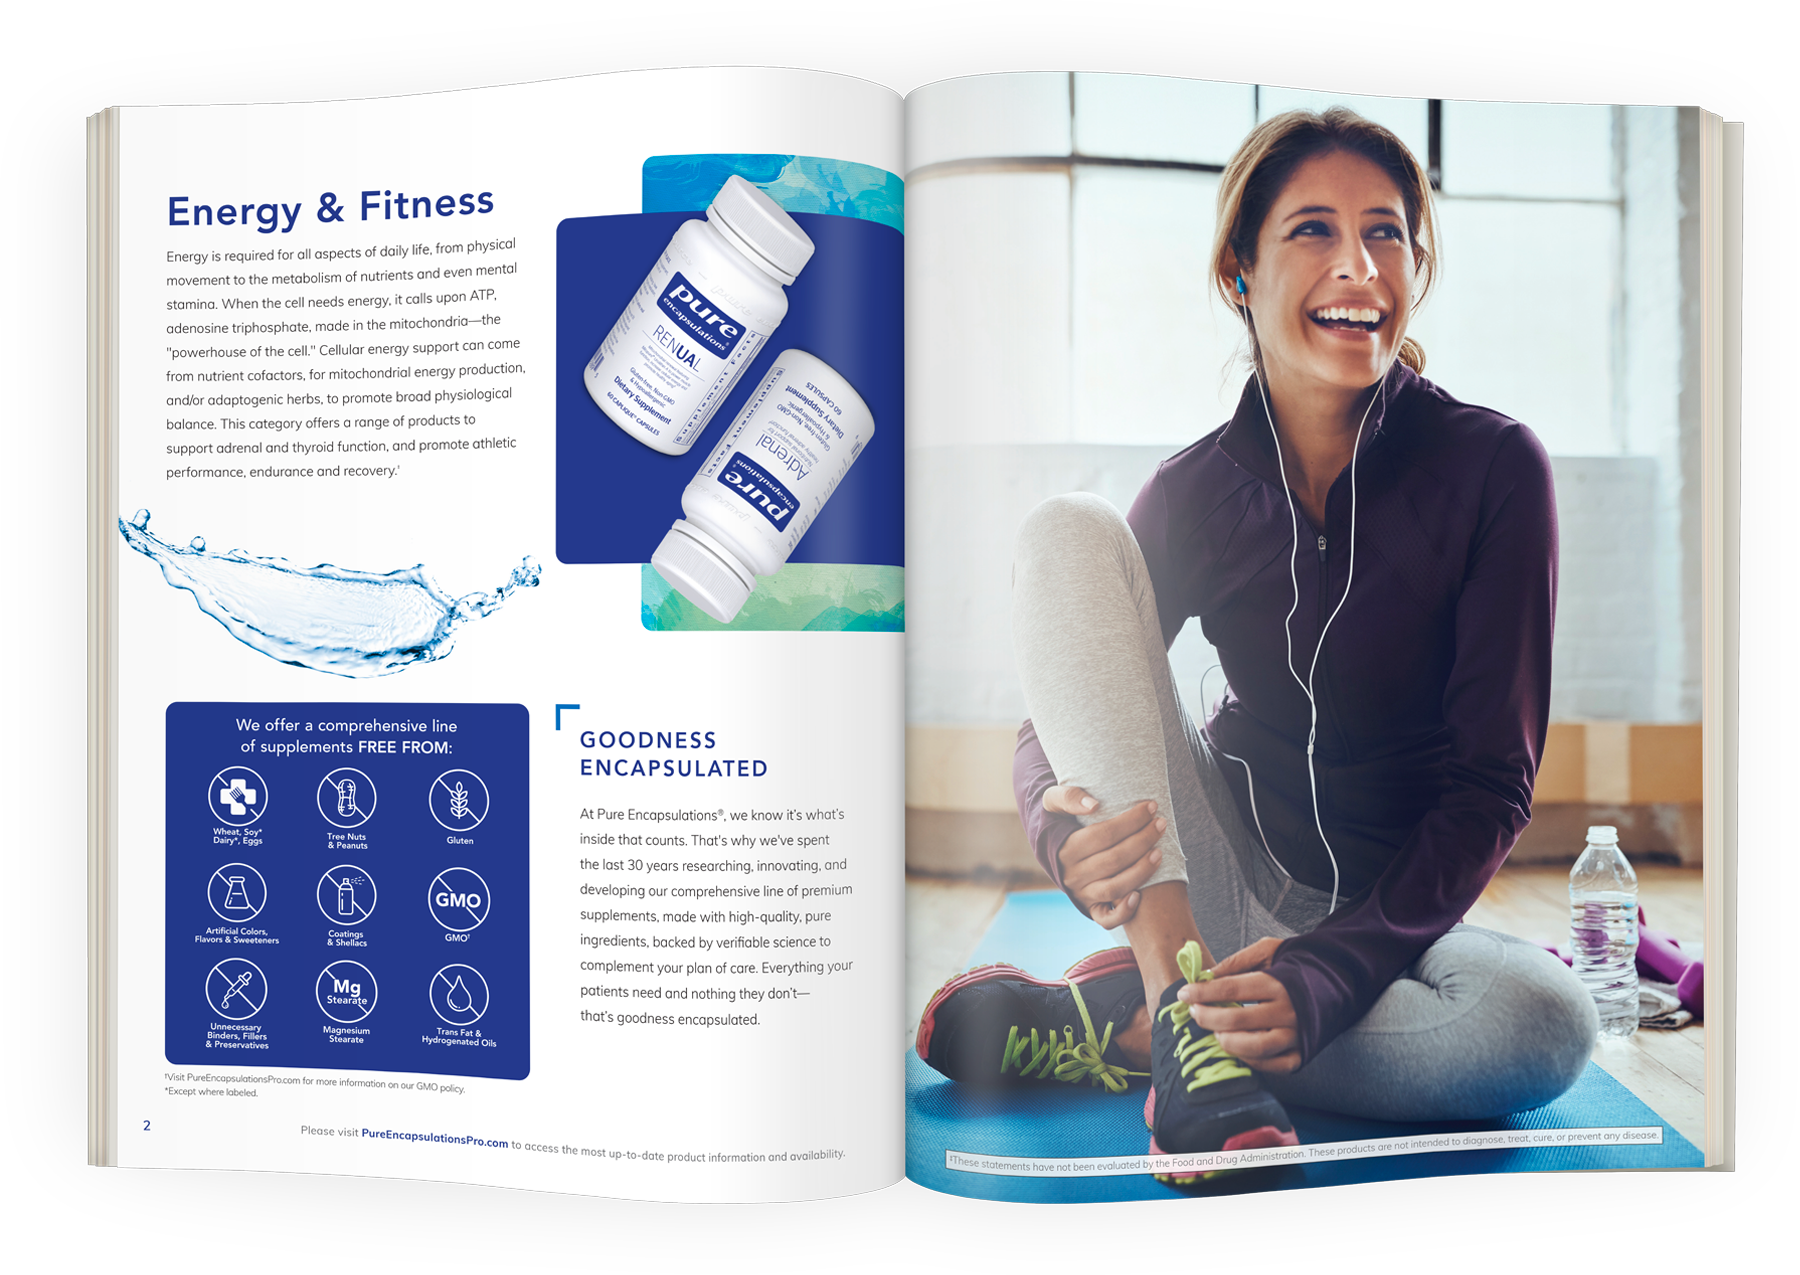 Energy & Fitness intro page